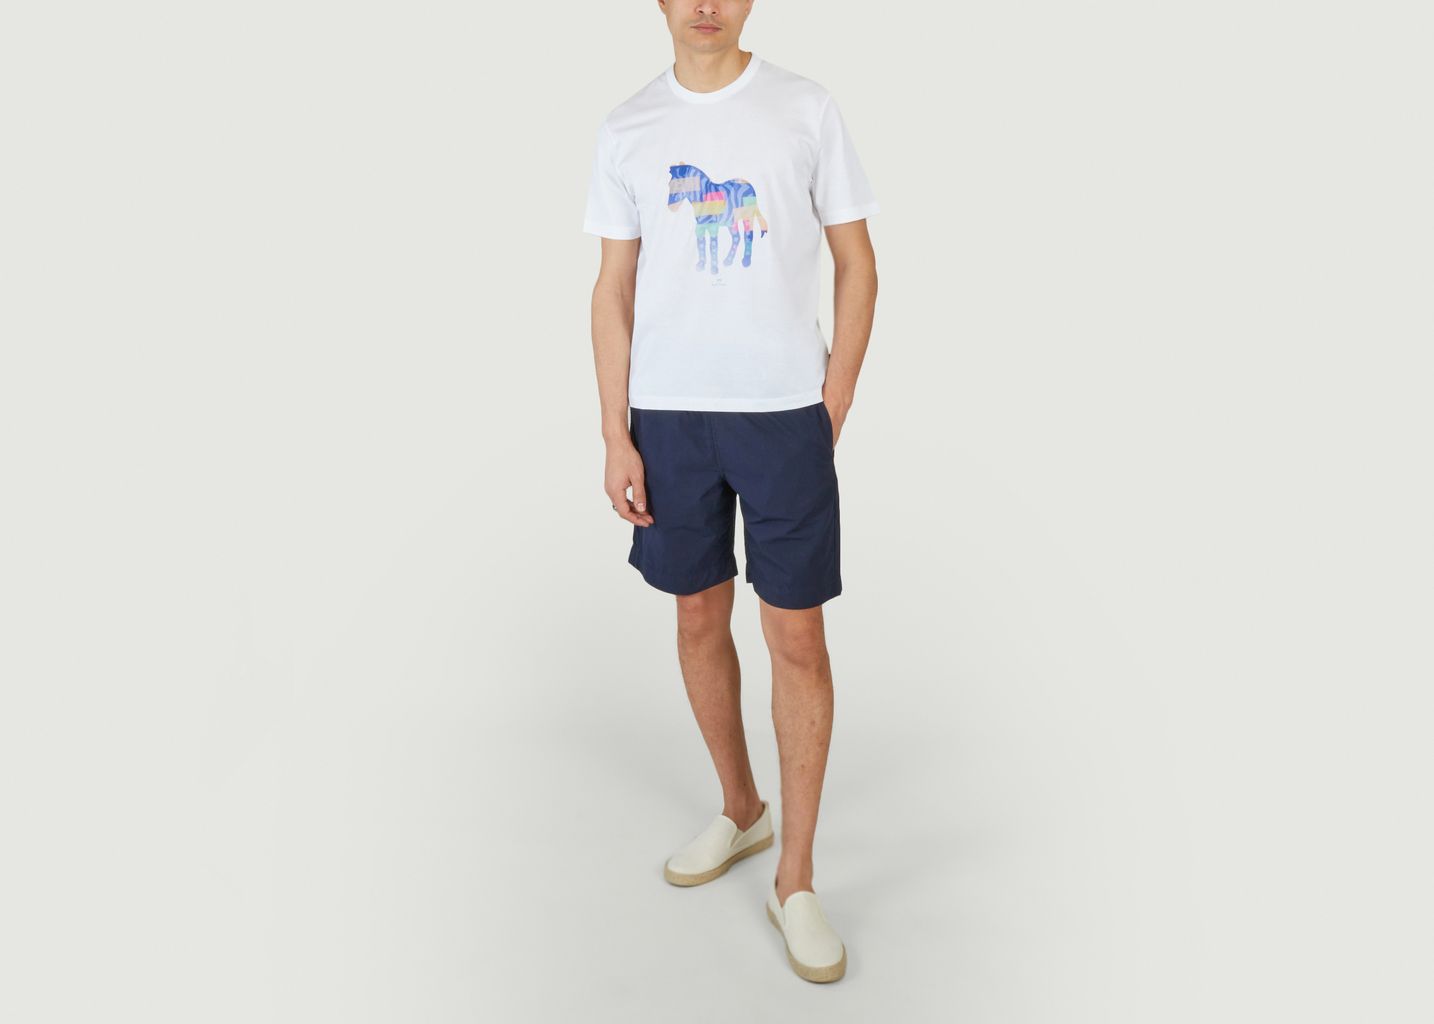 Mens Shorts - PS by PAUL SMITH